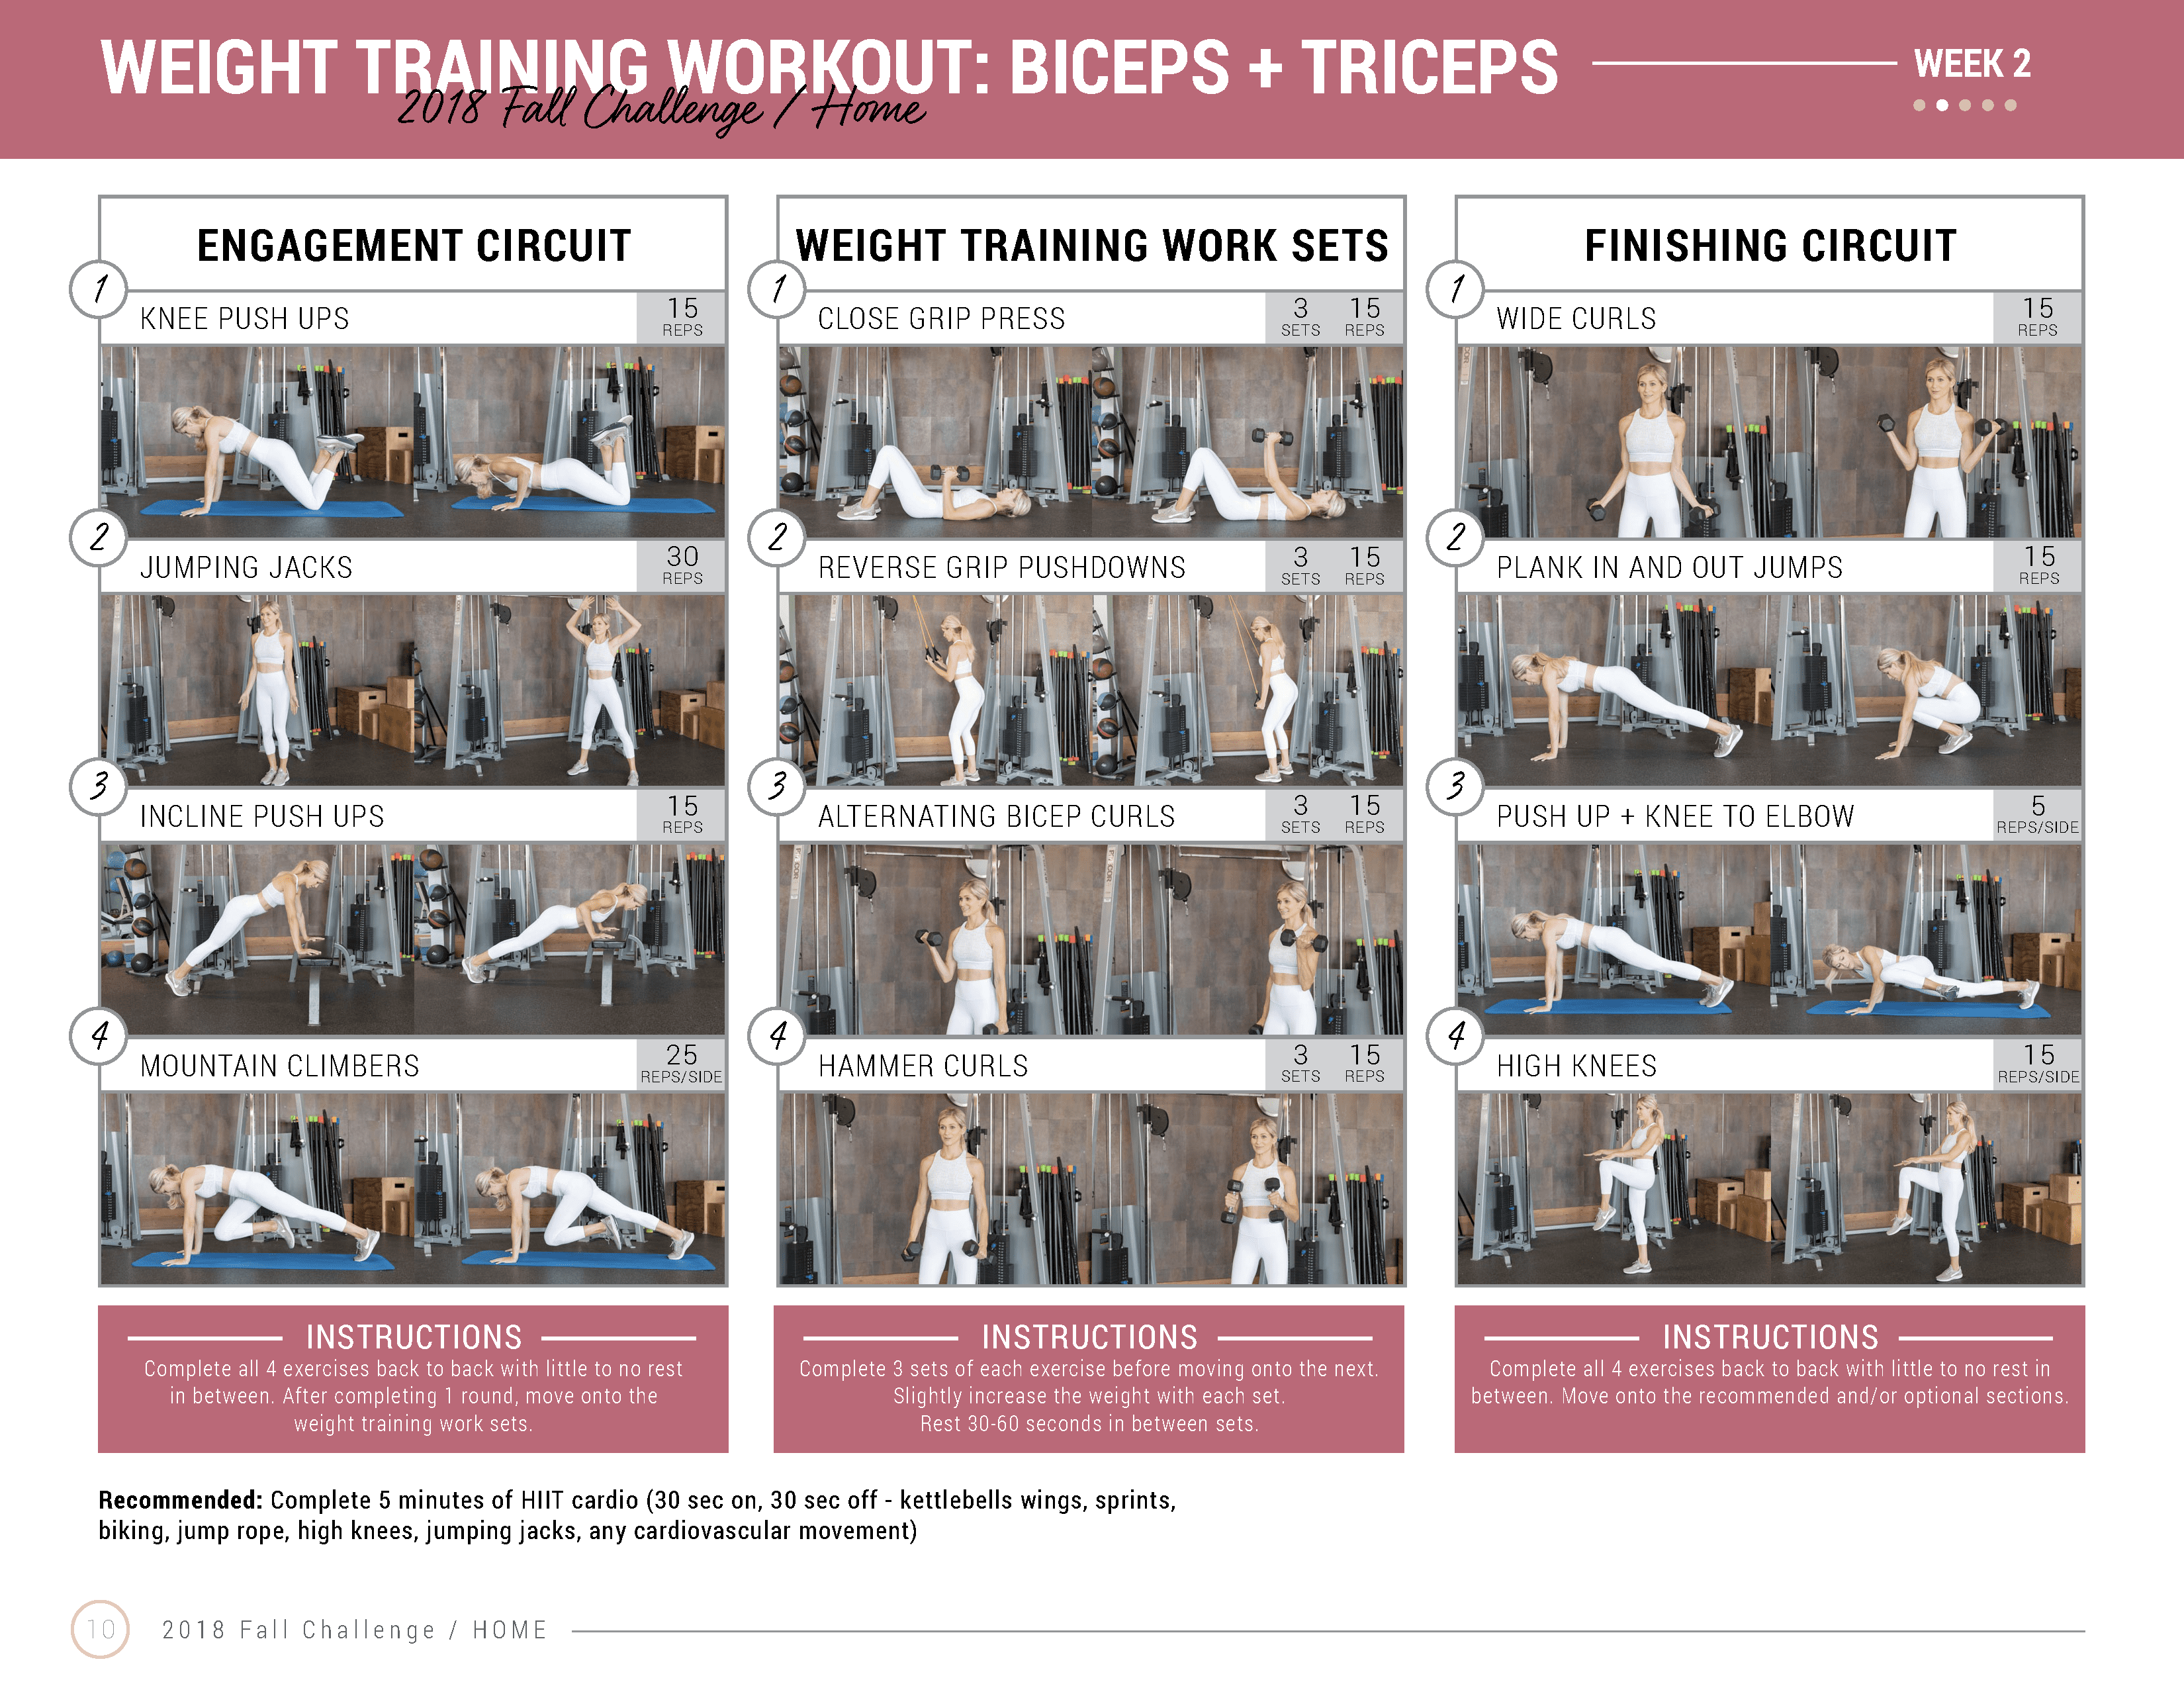 biceps and triceps arm workout for at home